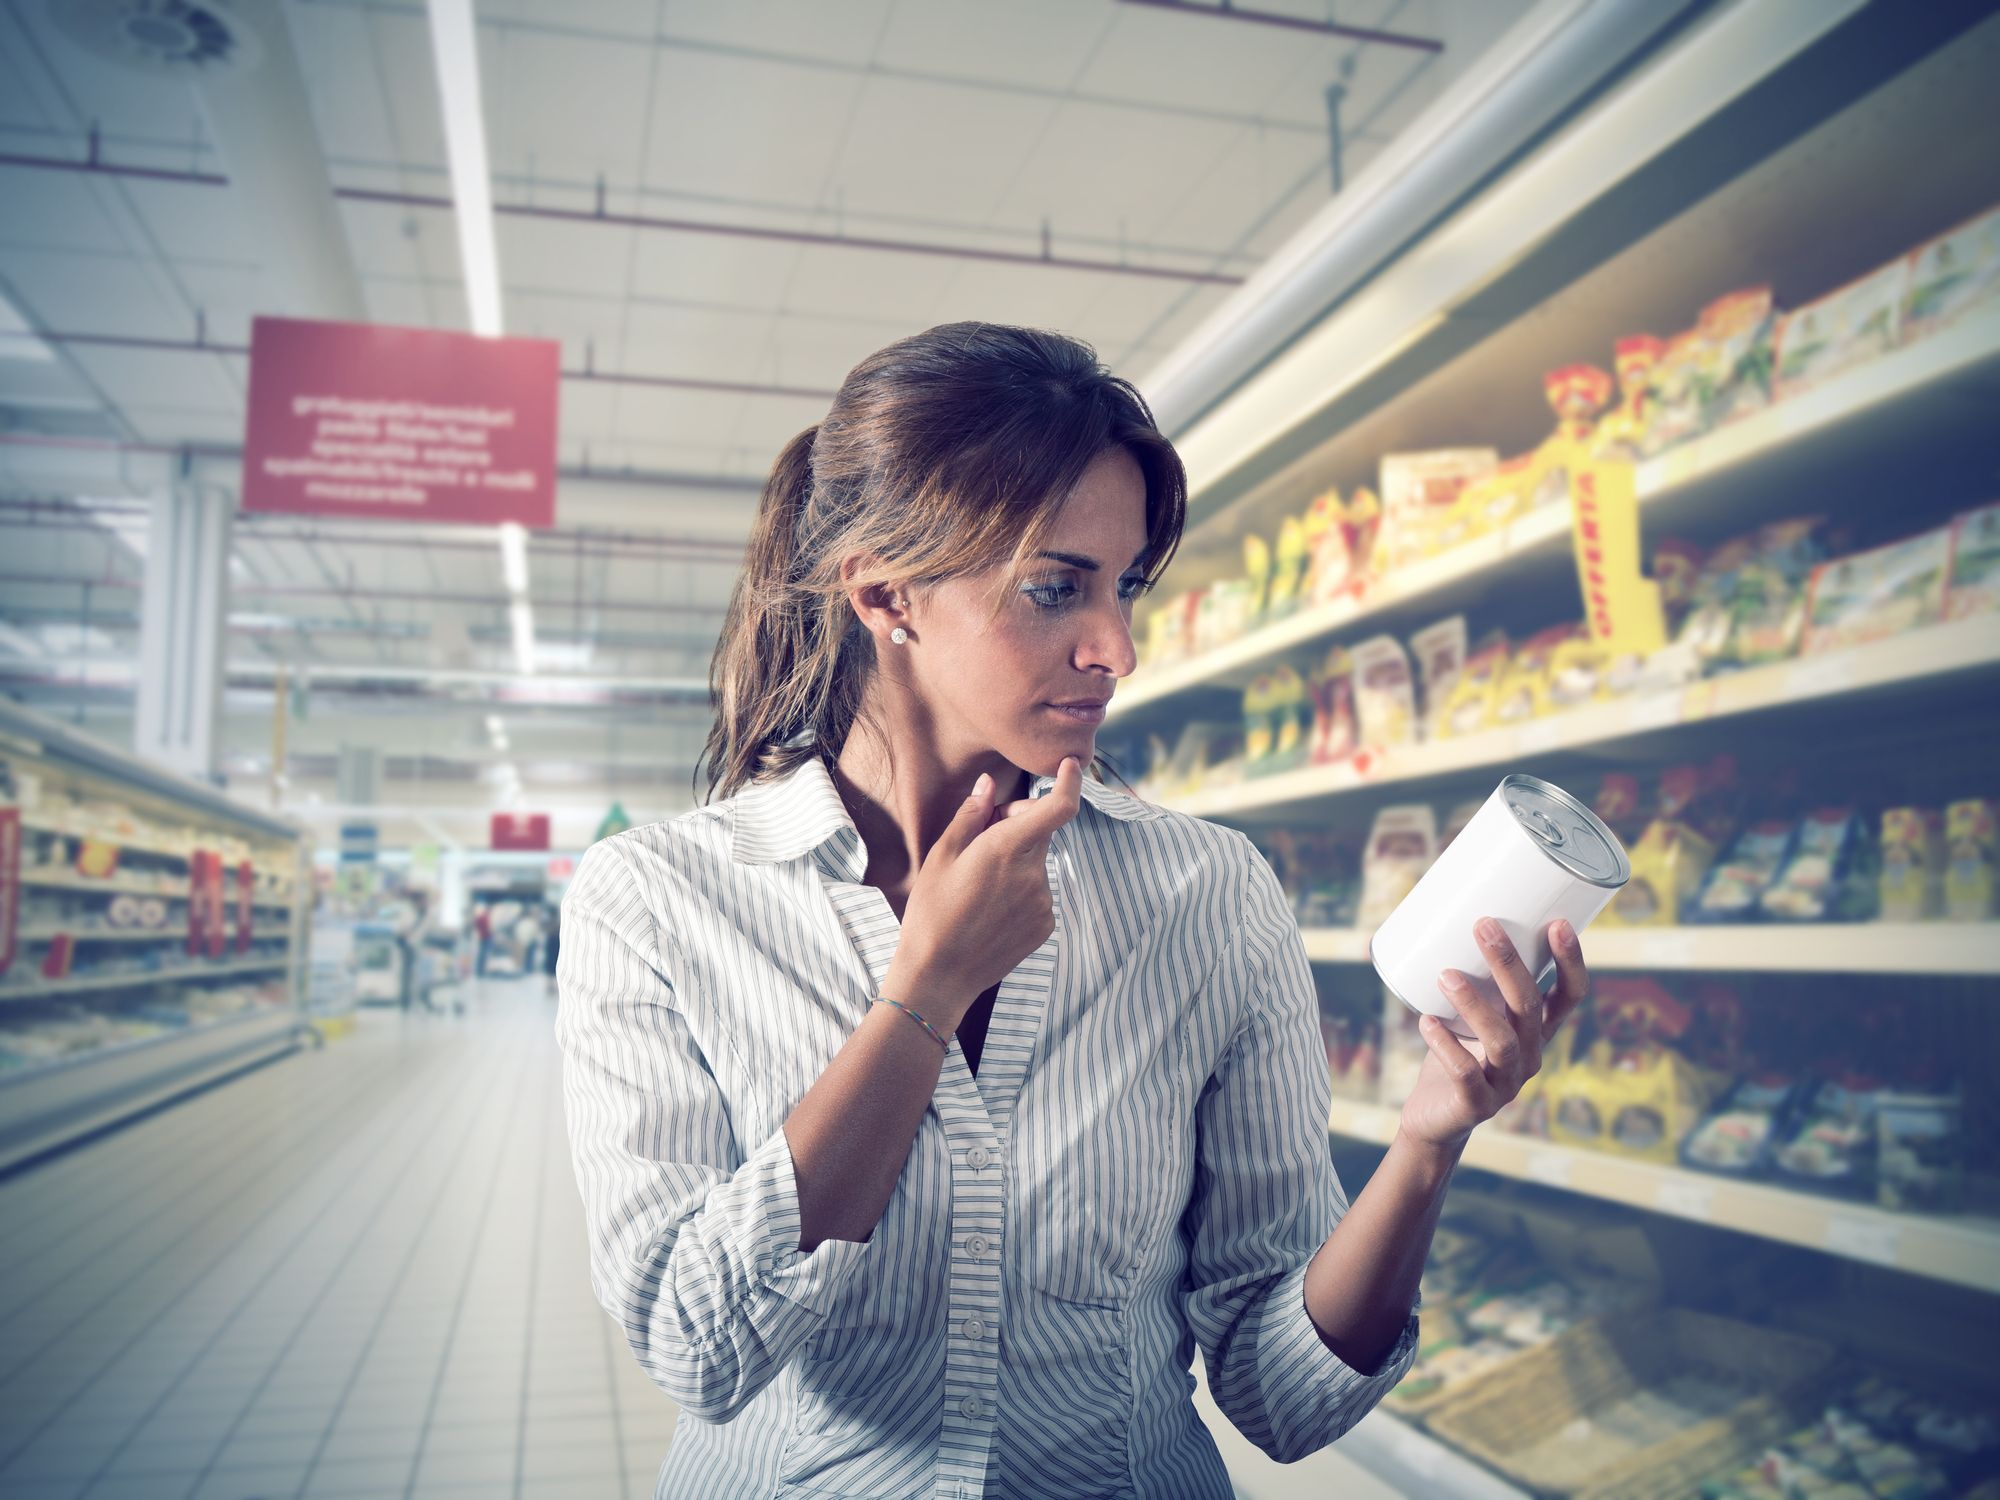 Girl unsure of the product at supermarket